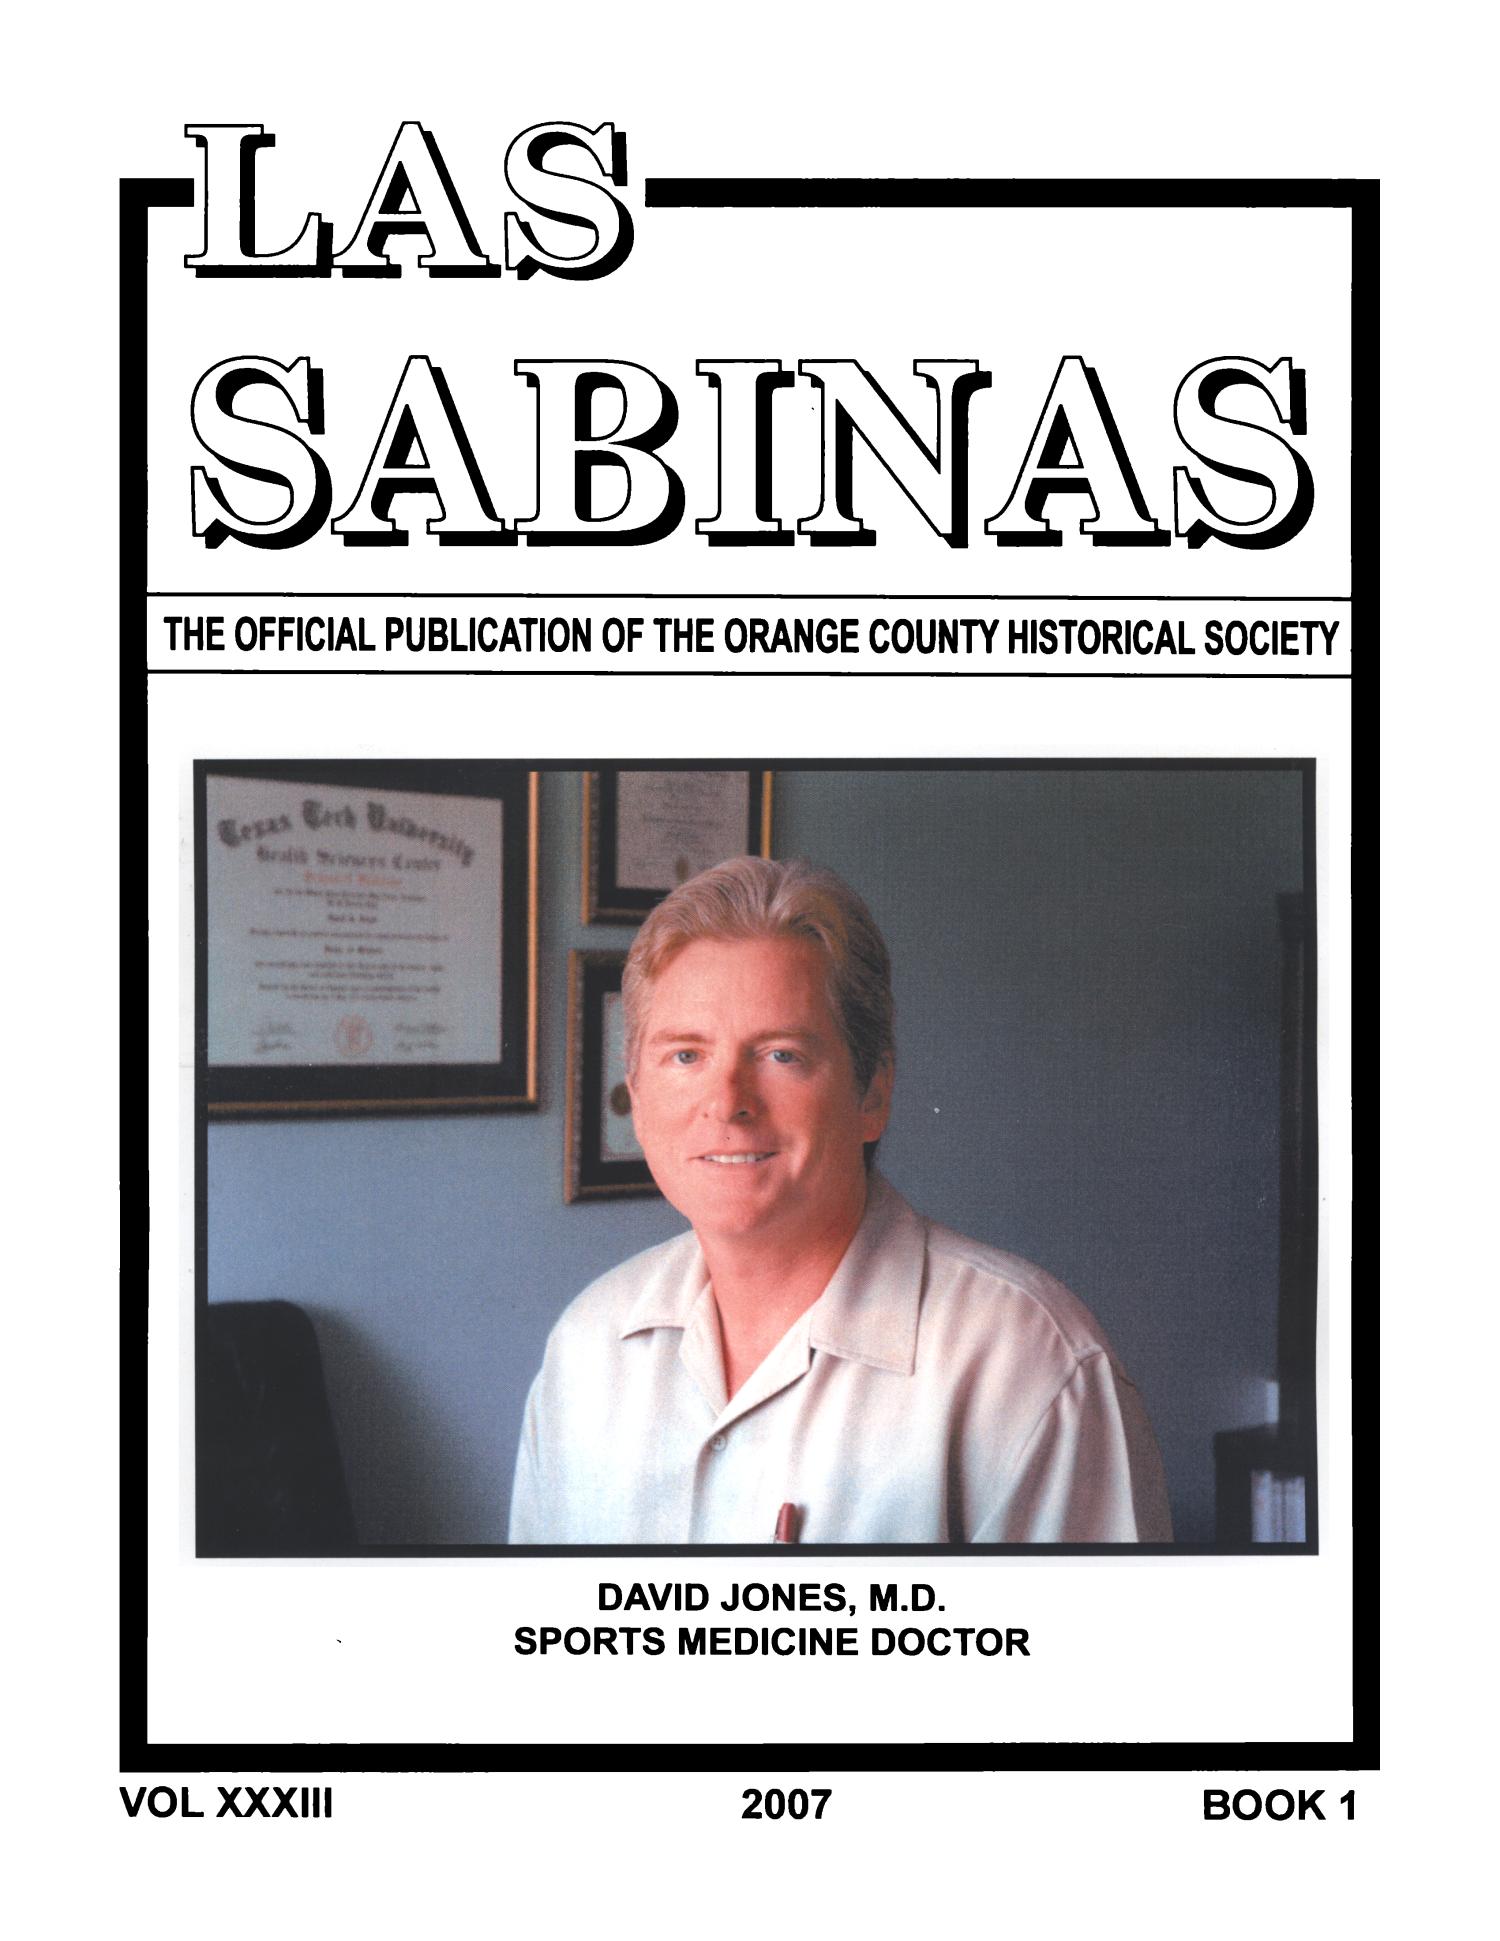 Las Sabinas, Volume 33, Number 1, 2007
                                                
                                                    Front Cover
                                                